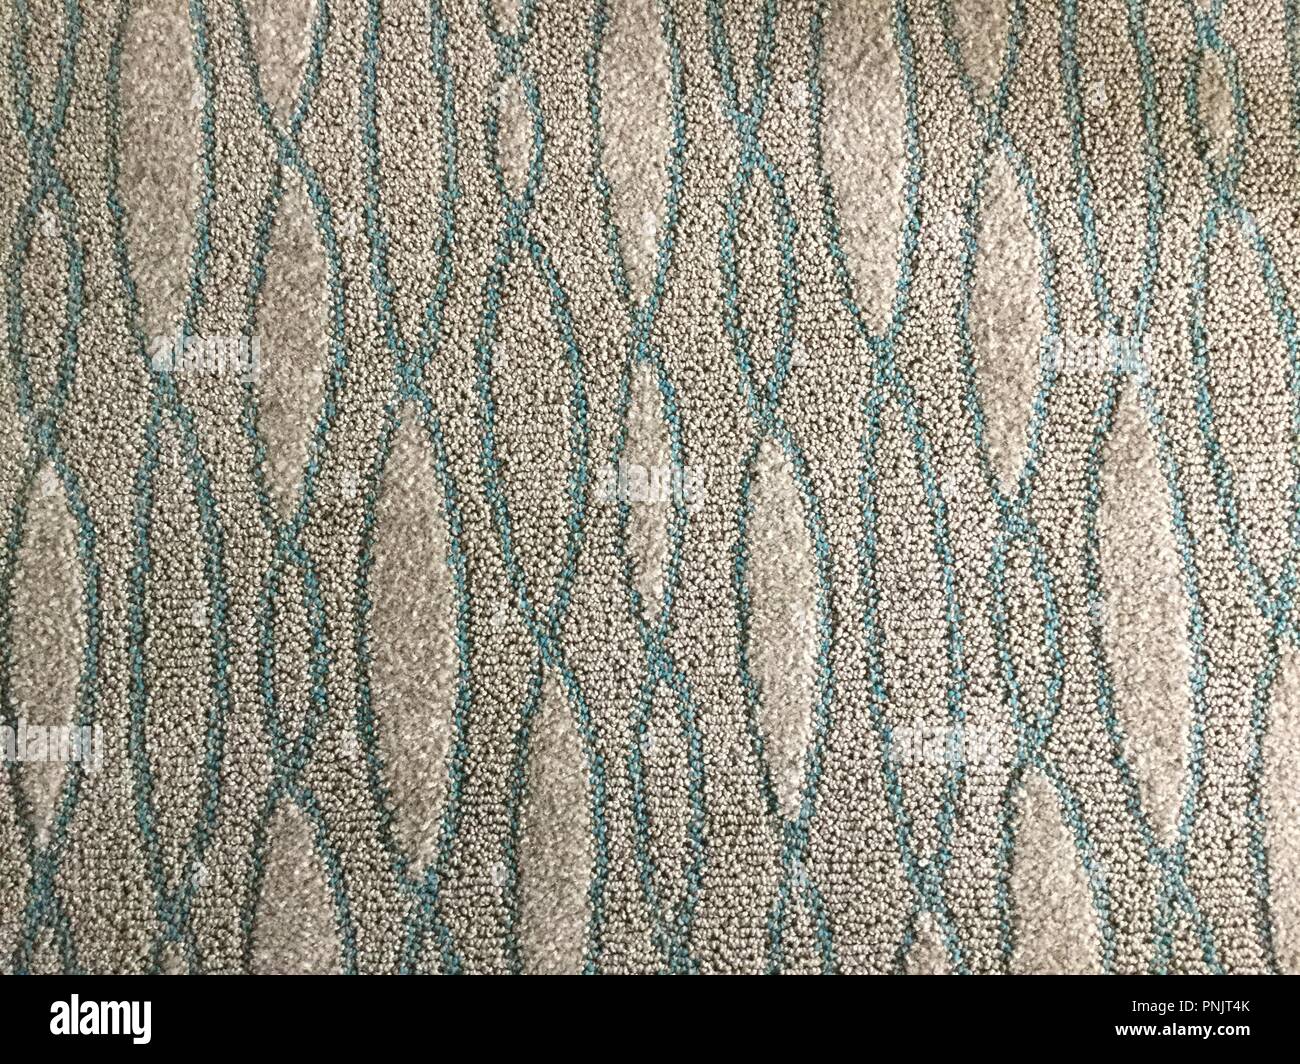 Abstract design on carpet, blue and white. Stock Photo